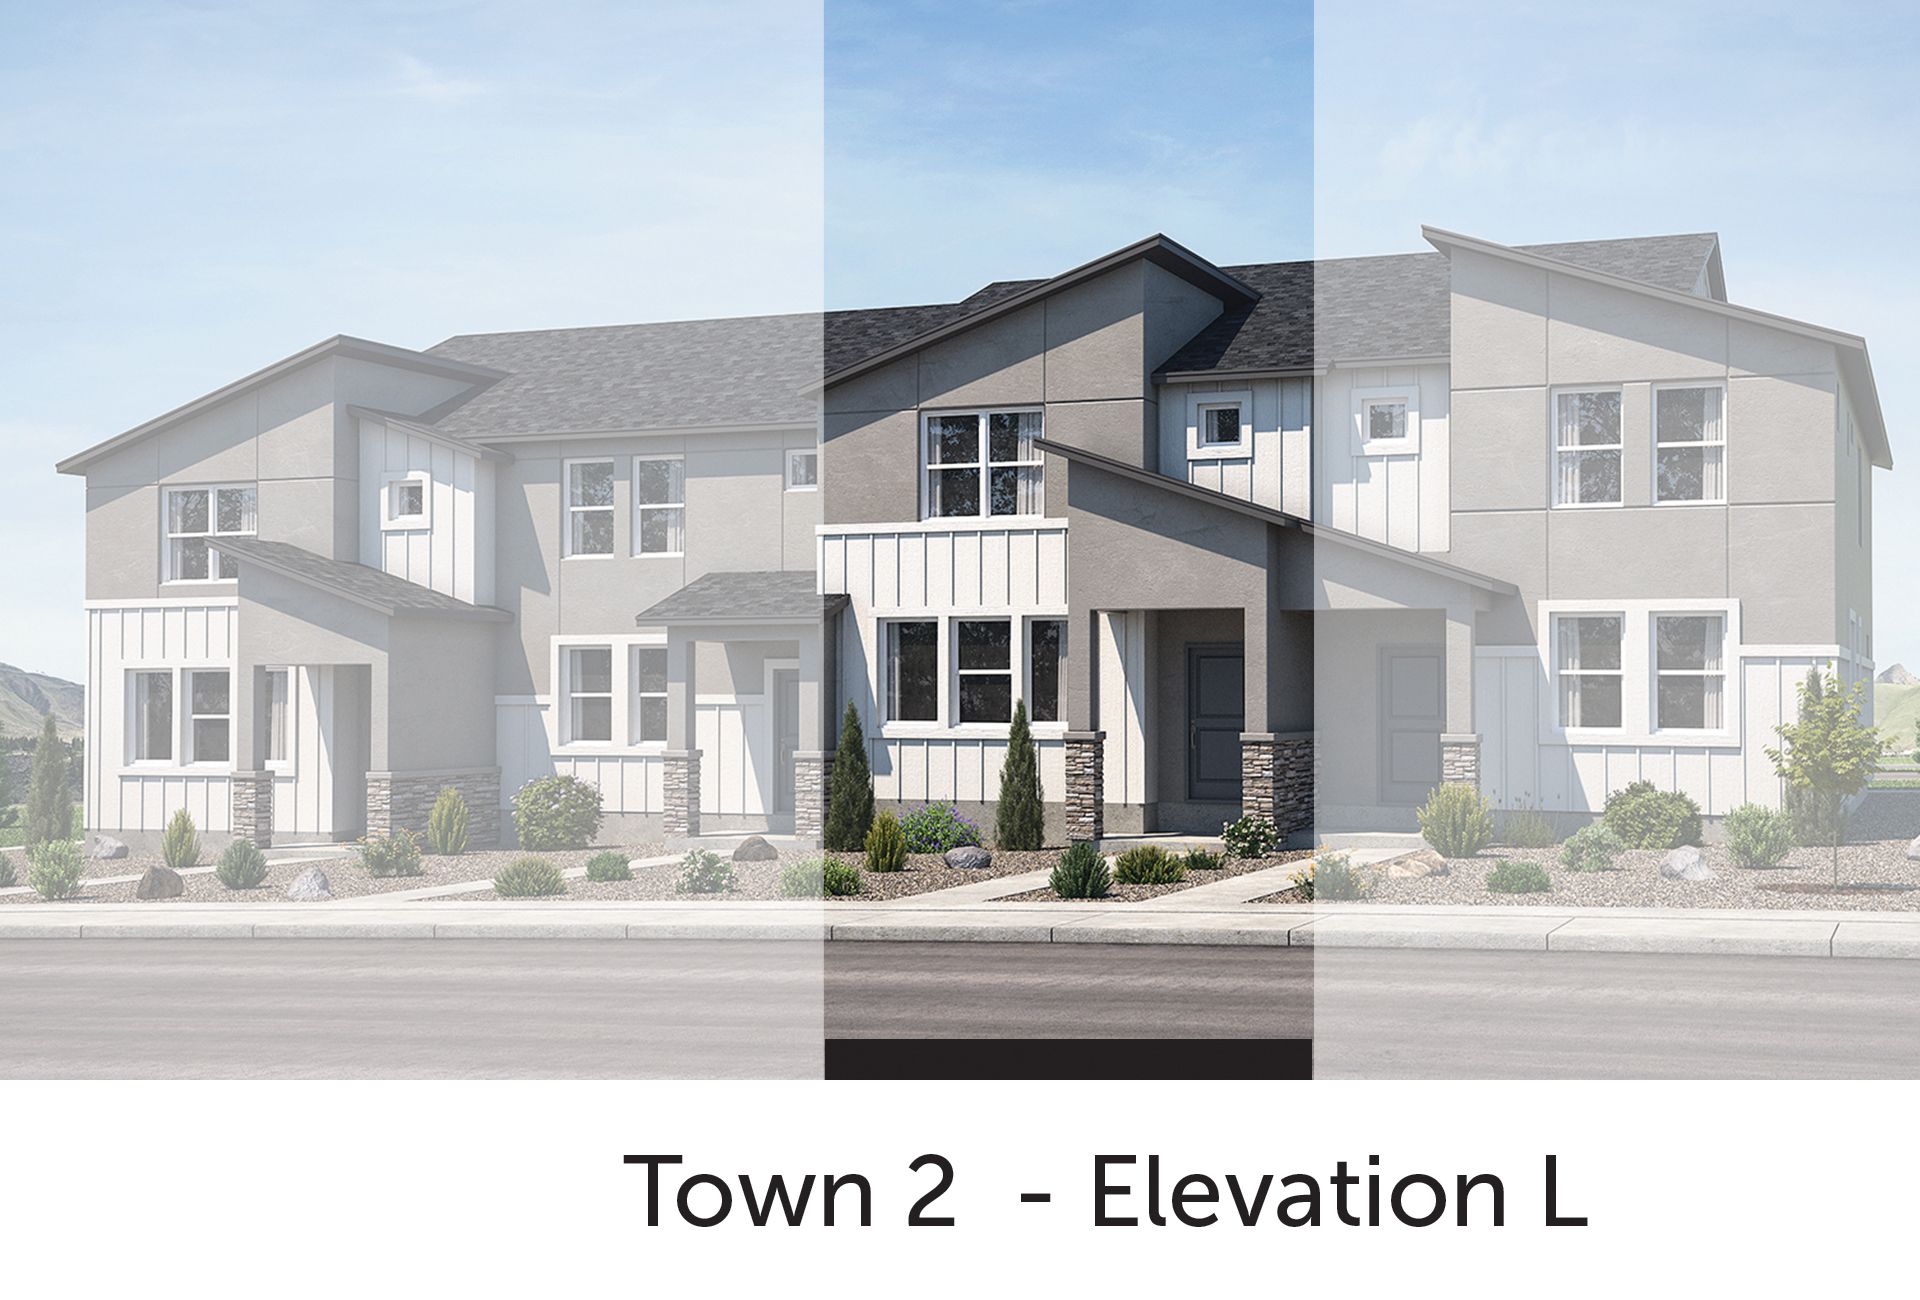 Elevation L:Town 2